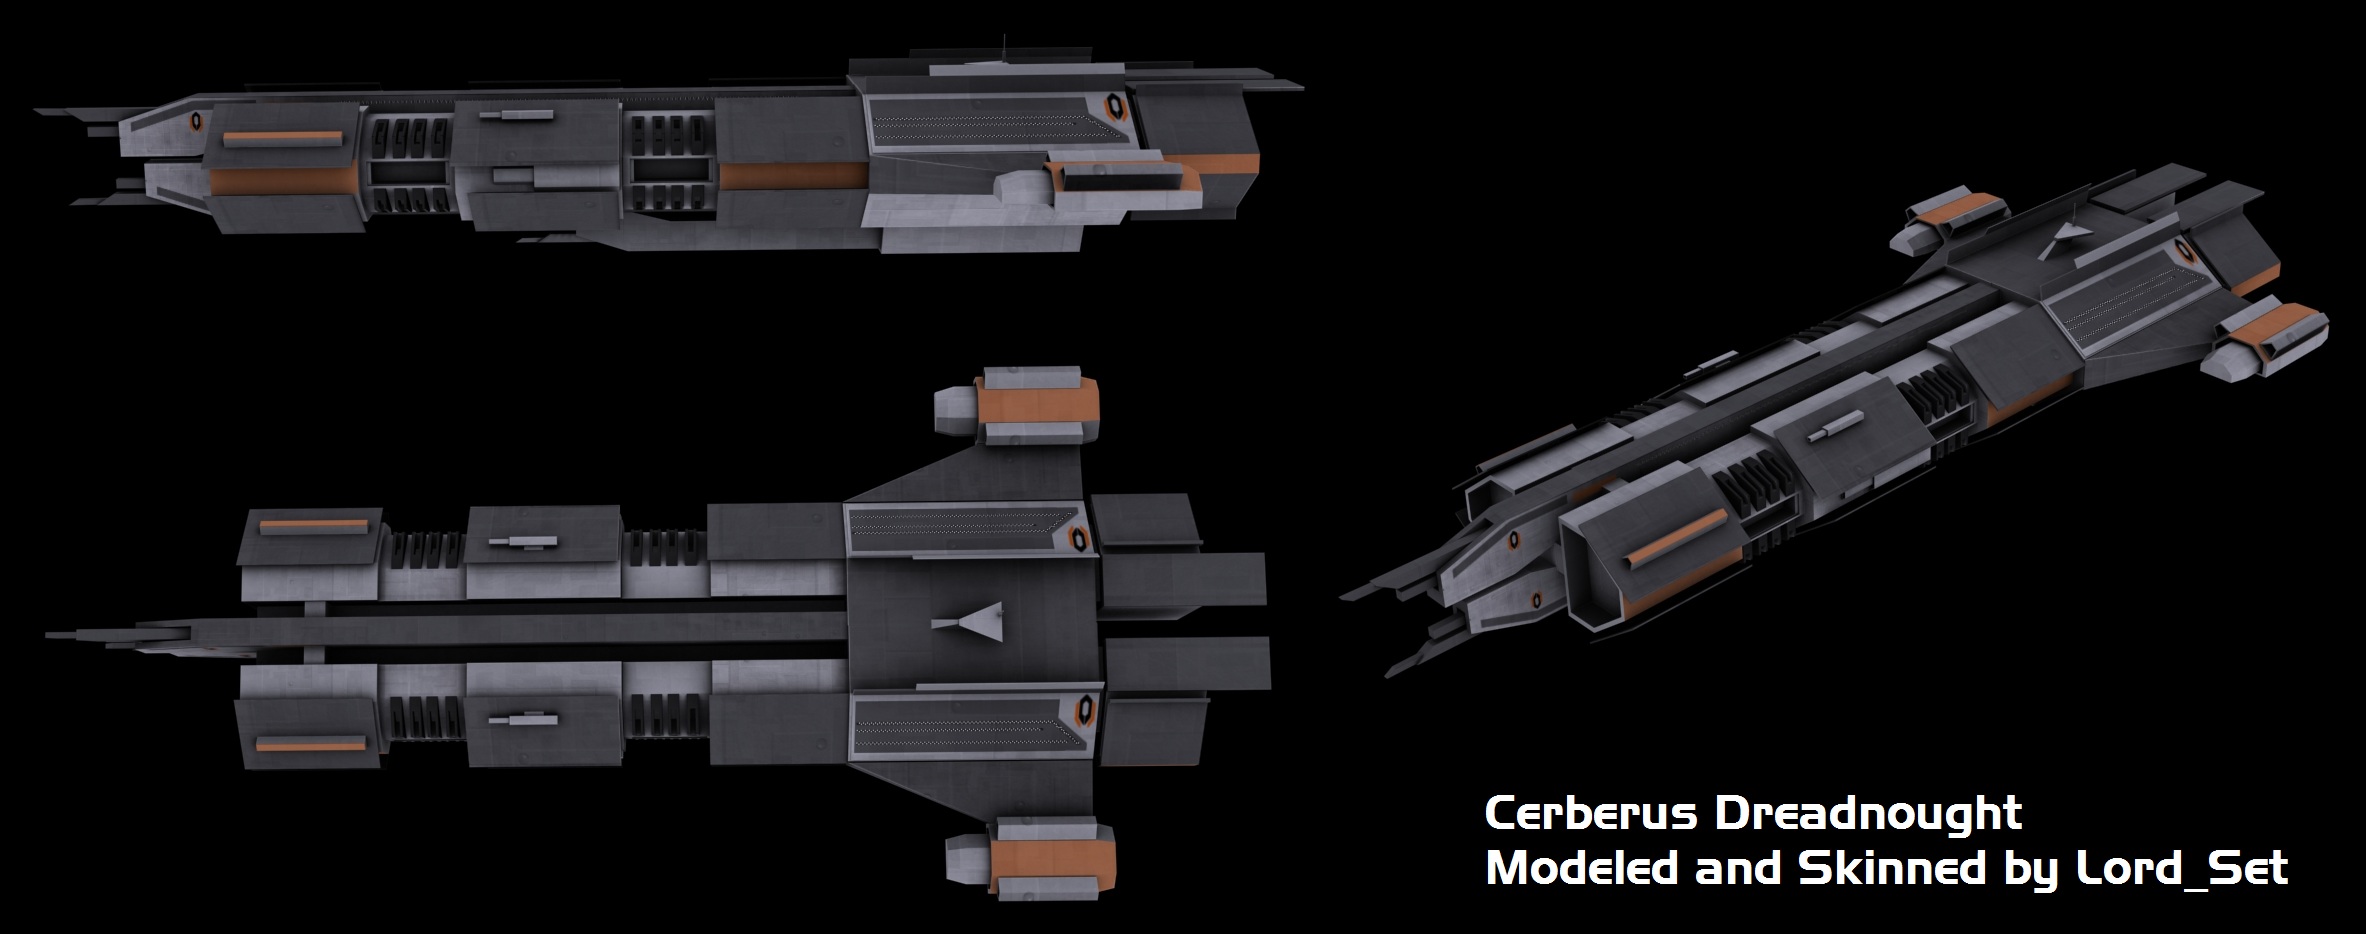 Cerberus Dreadnought v5 image - Dawn of the Reapers mod for Sins of a Solar...